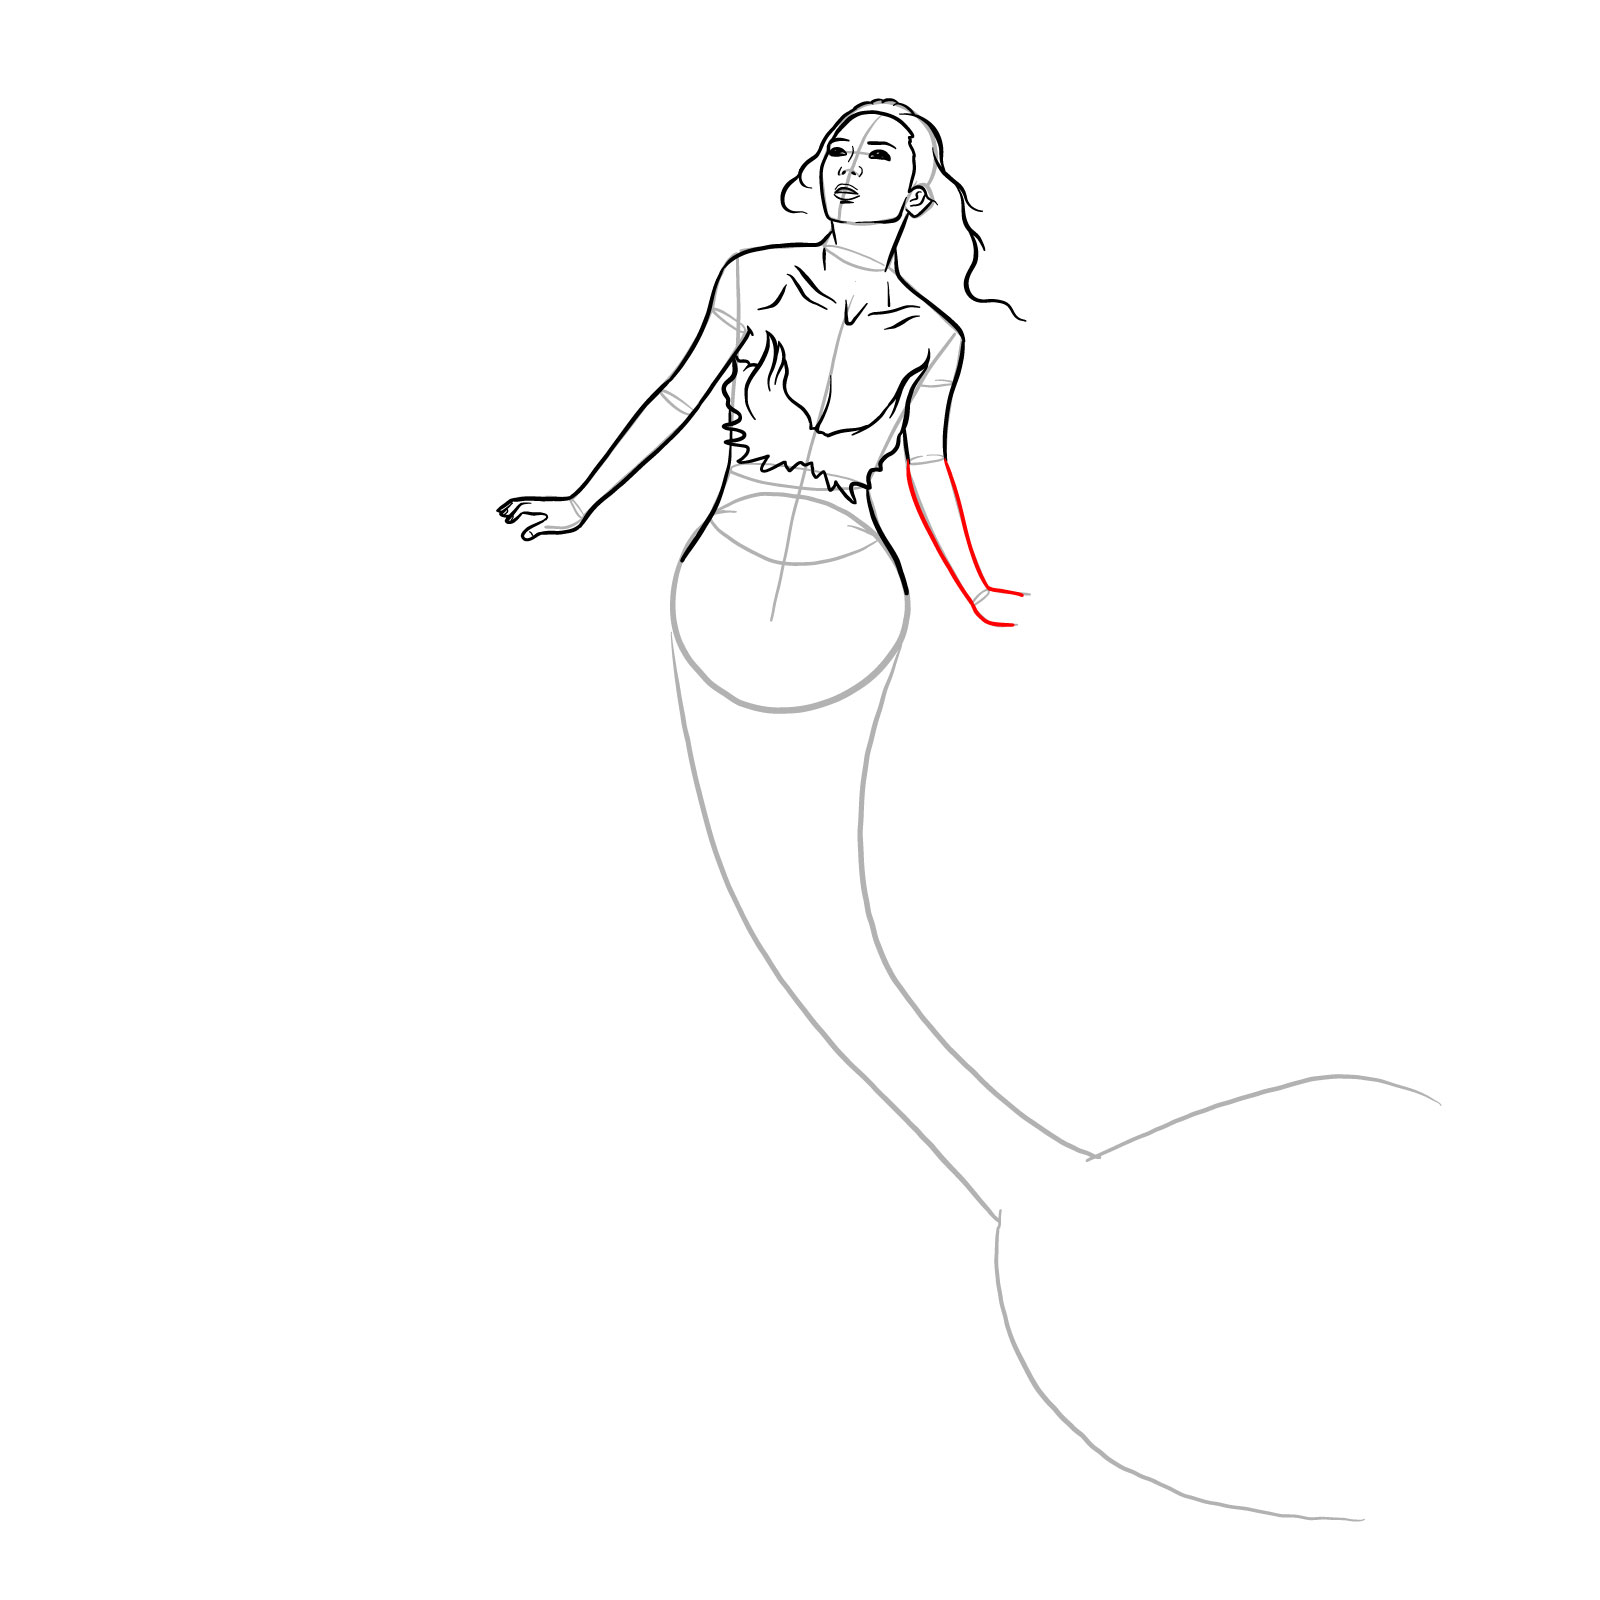 How to draw a Mermaid - step 17